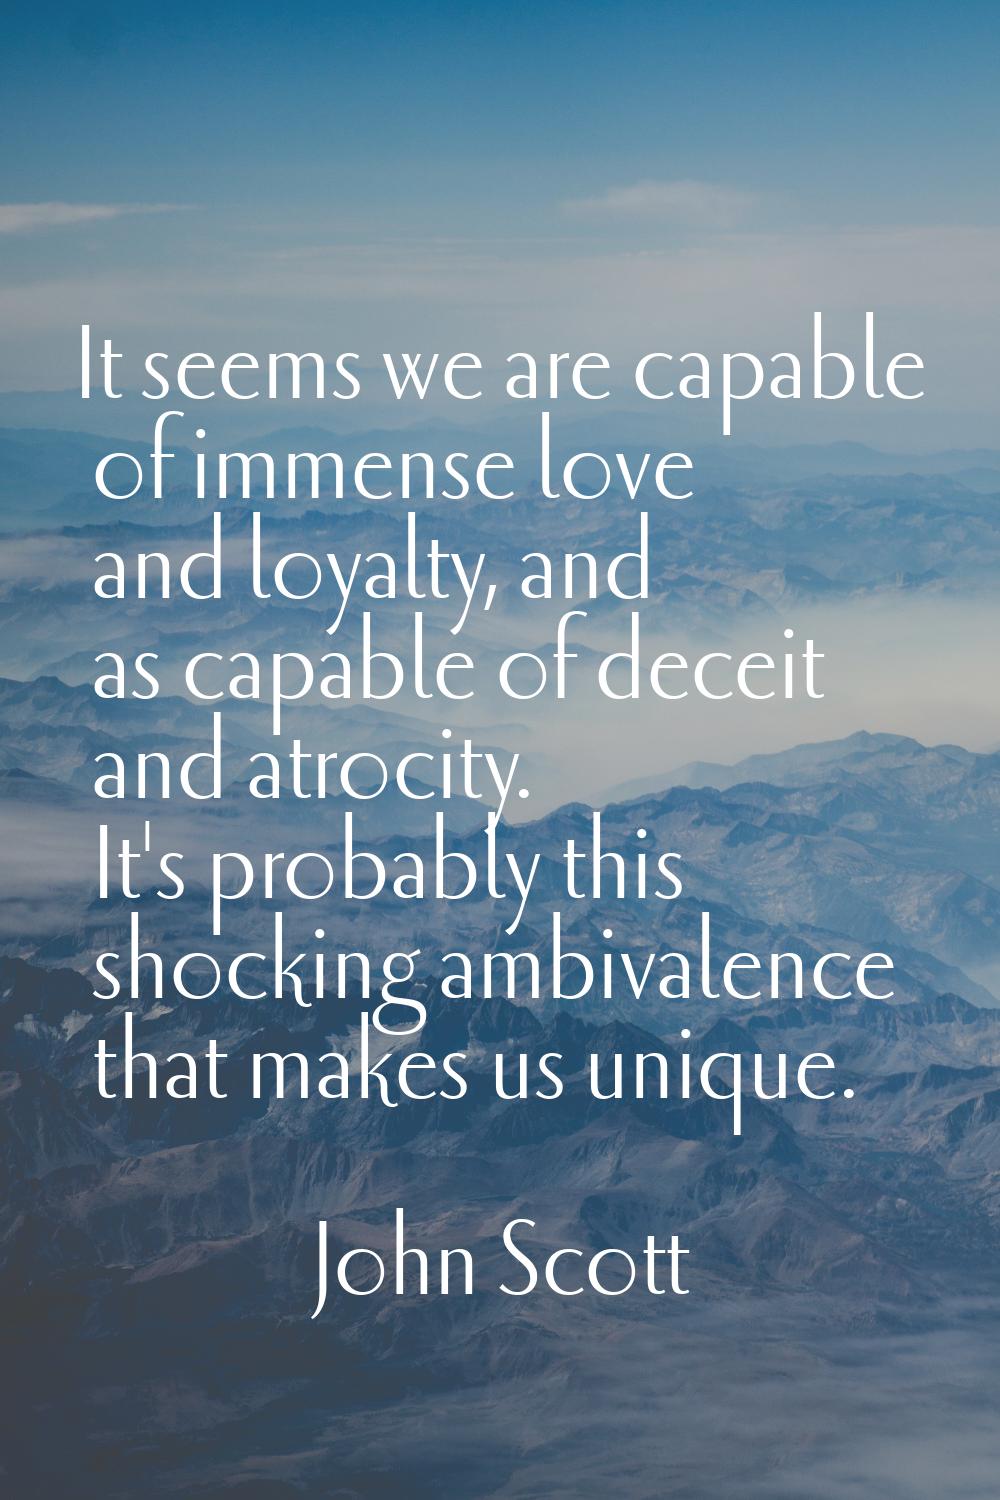 It seems we are capable of immense love and loyalty, and as capable of deceit and atrocity. It's pr